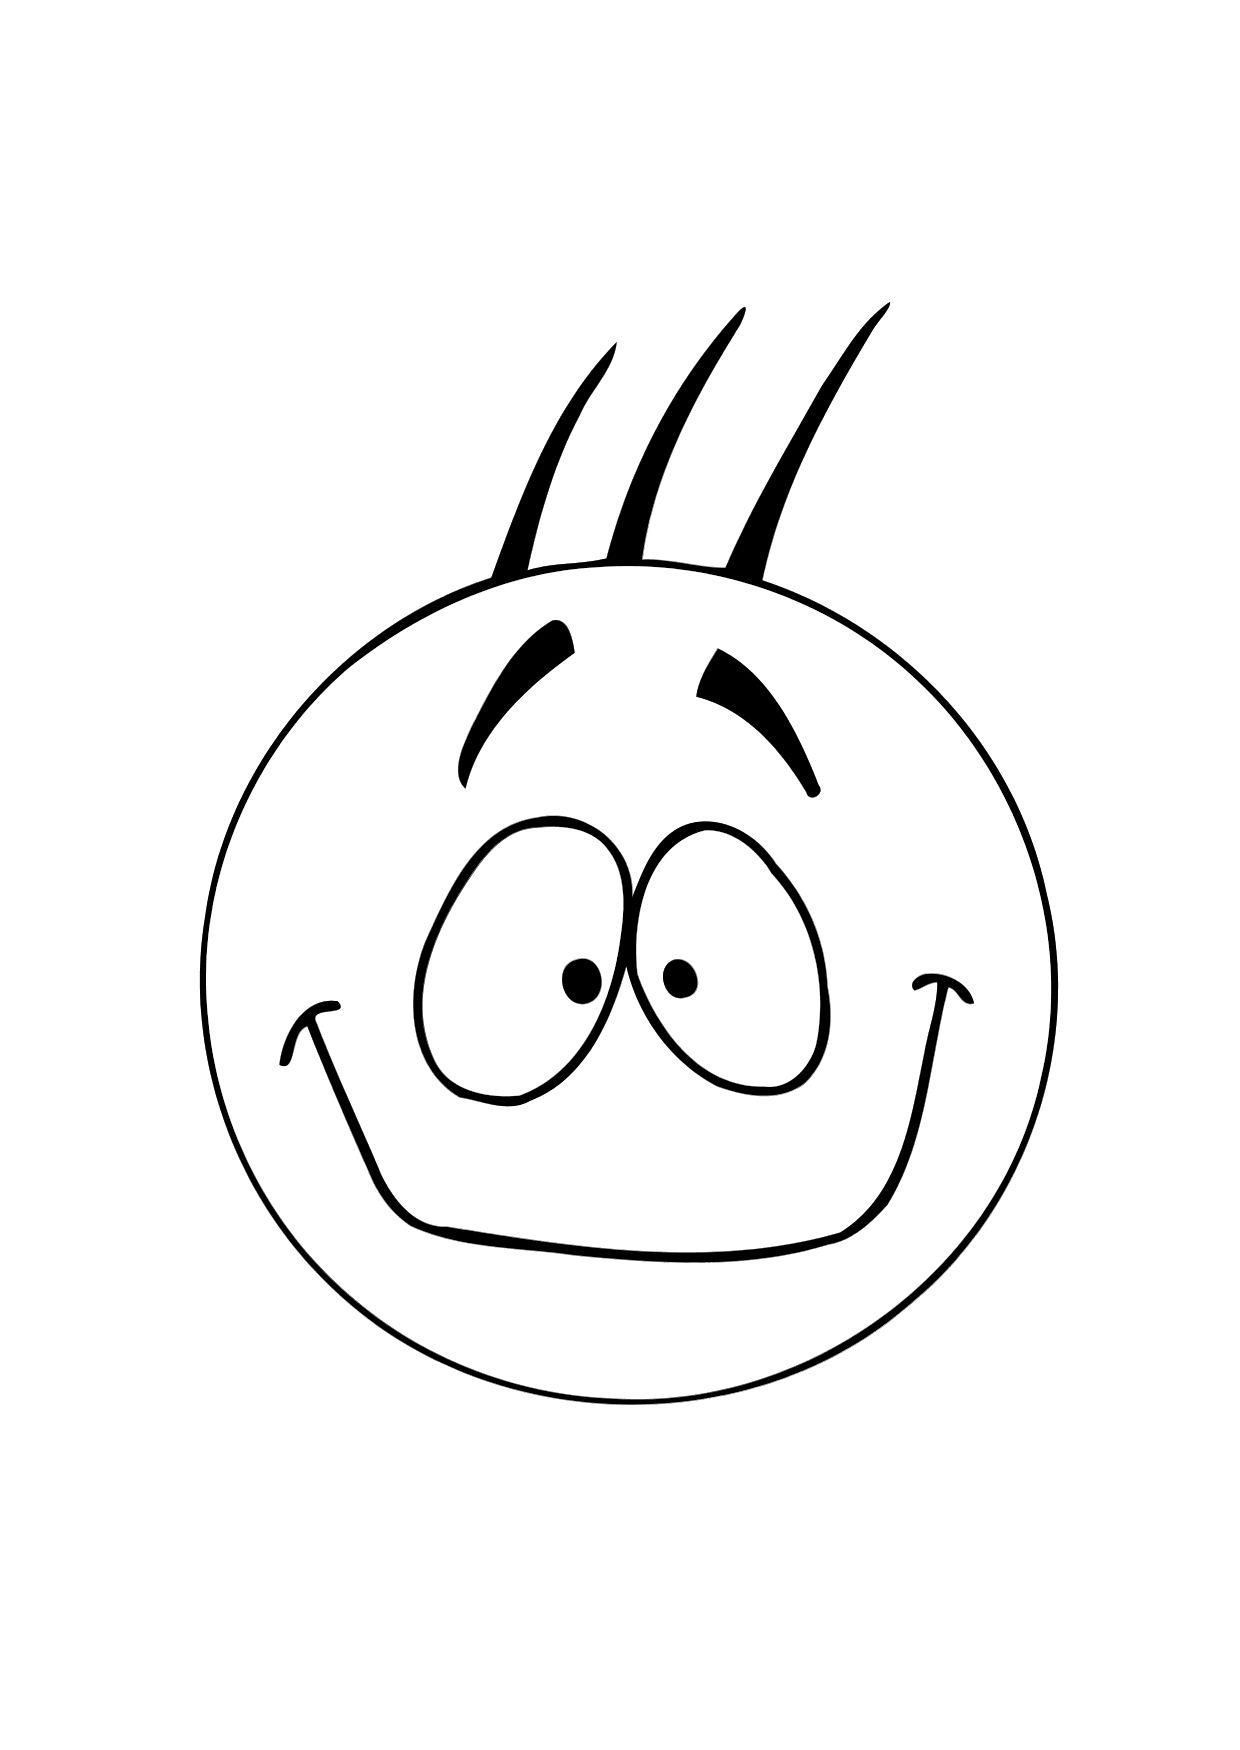 Coloring page: Smiley (Others) #116020 - Printable coloring pages